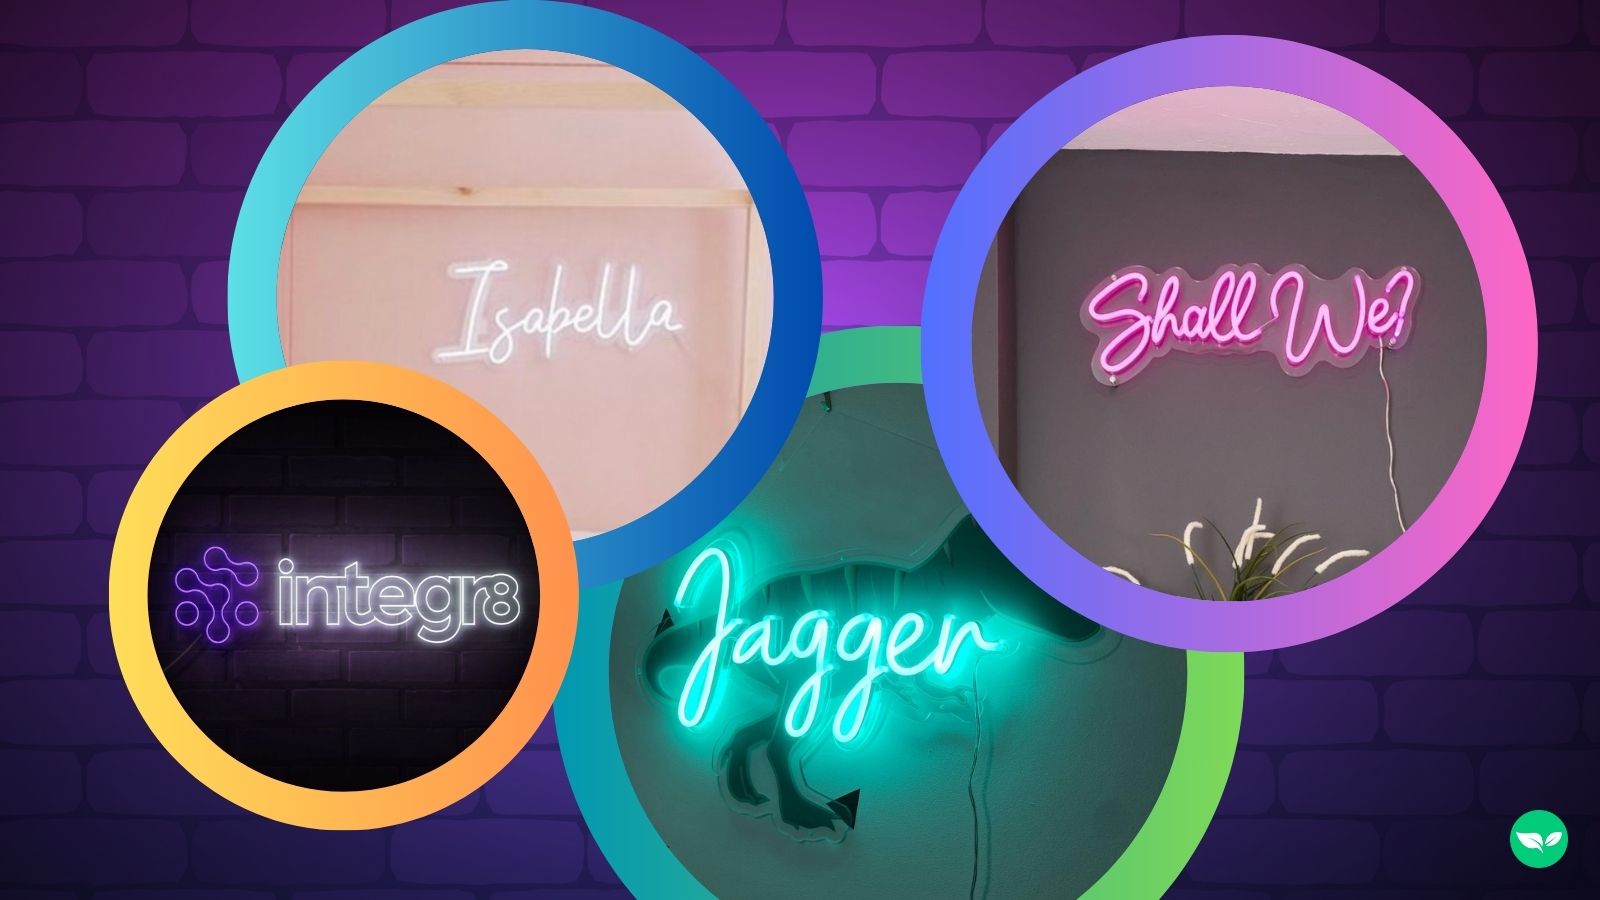 Examples of signs made by Custom Neon.